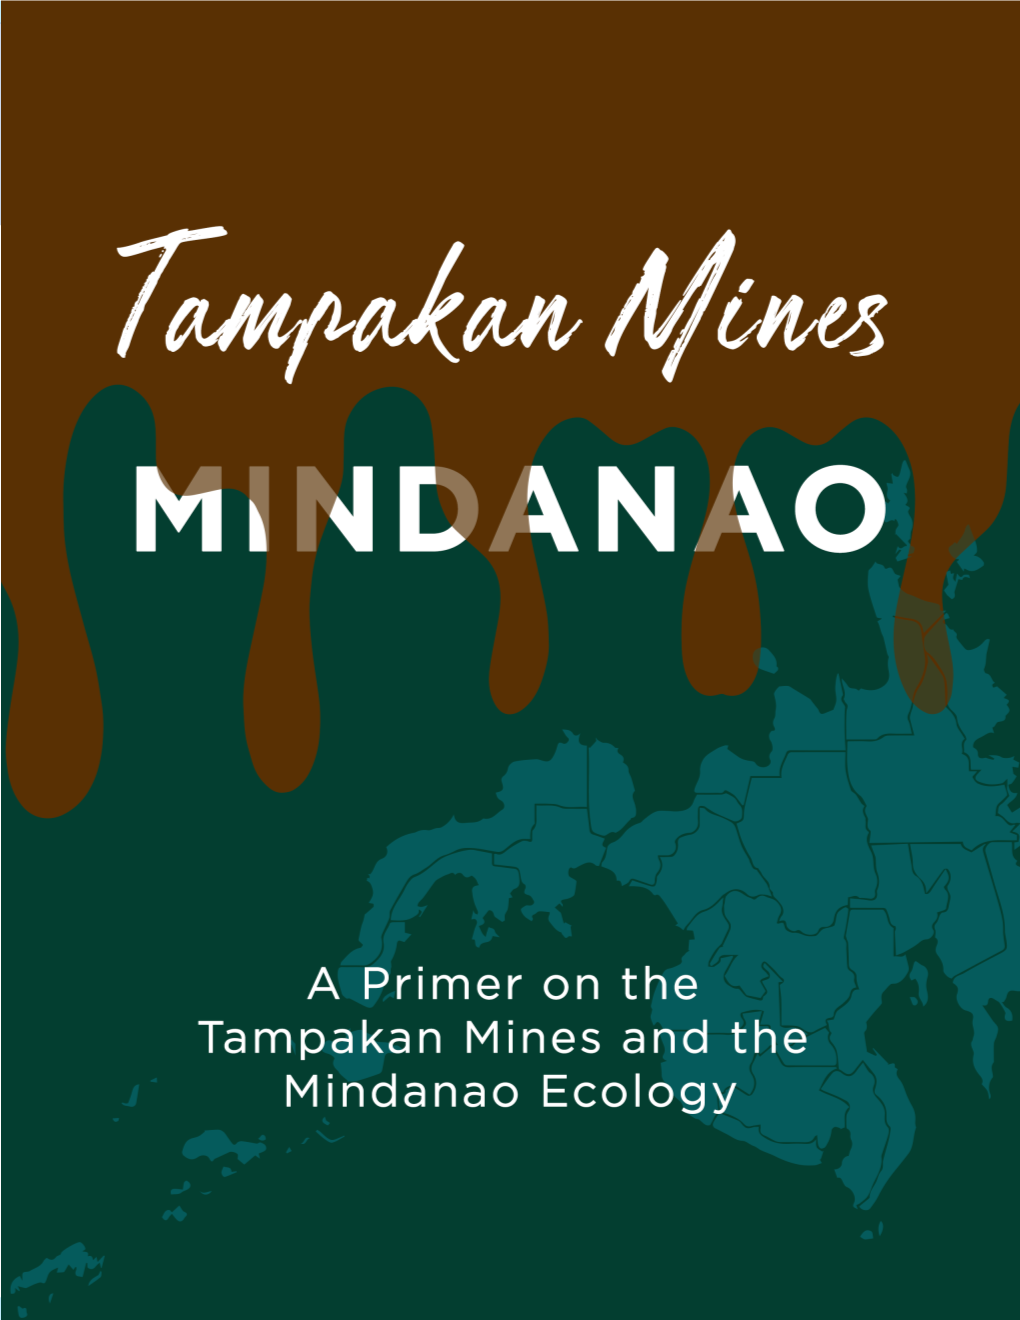 A Primer on the Tampakan Mines and the Mindanao Ecology